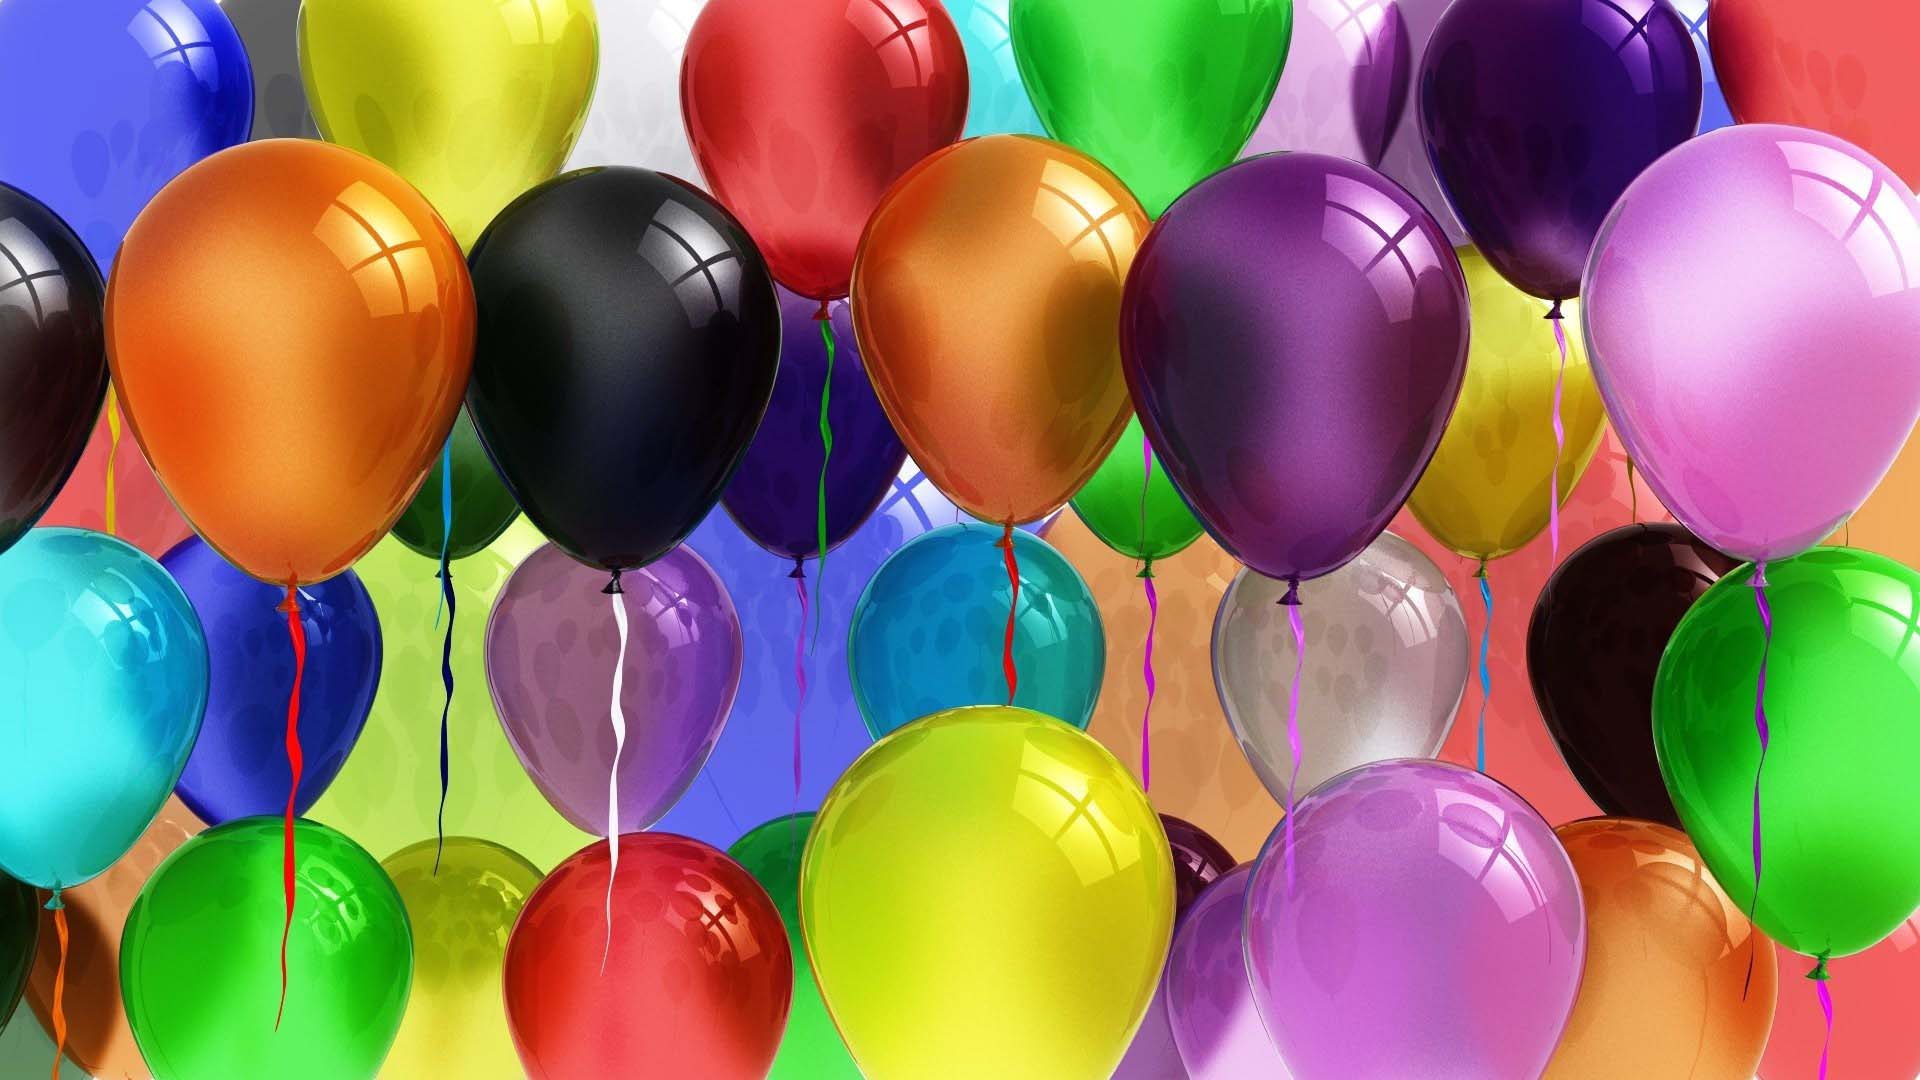 Birthday Balloons Colorful Wallpapers for free Daily Backgrounds